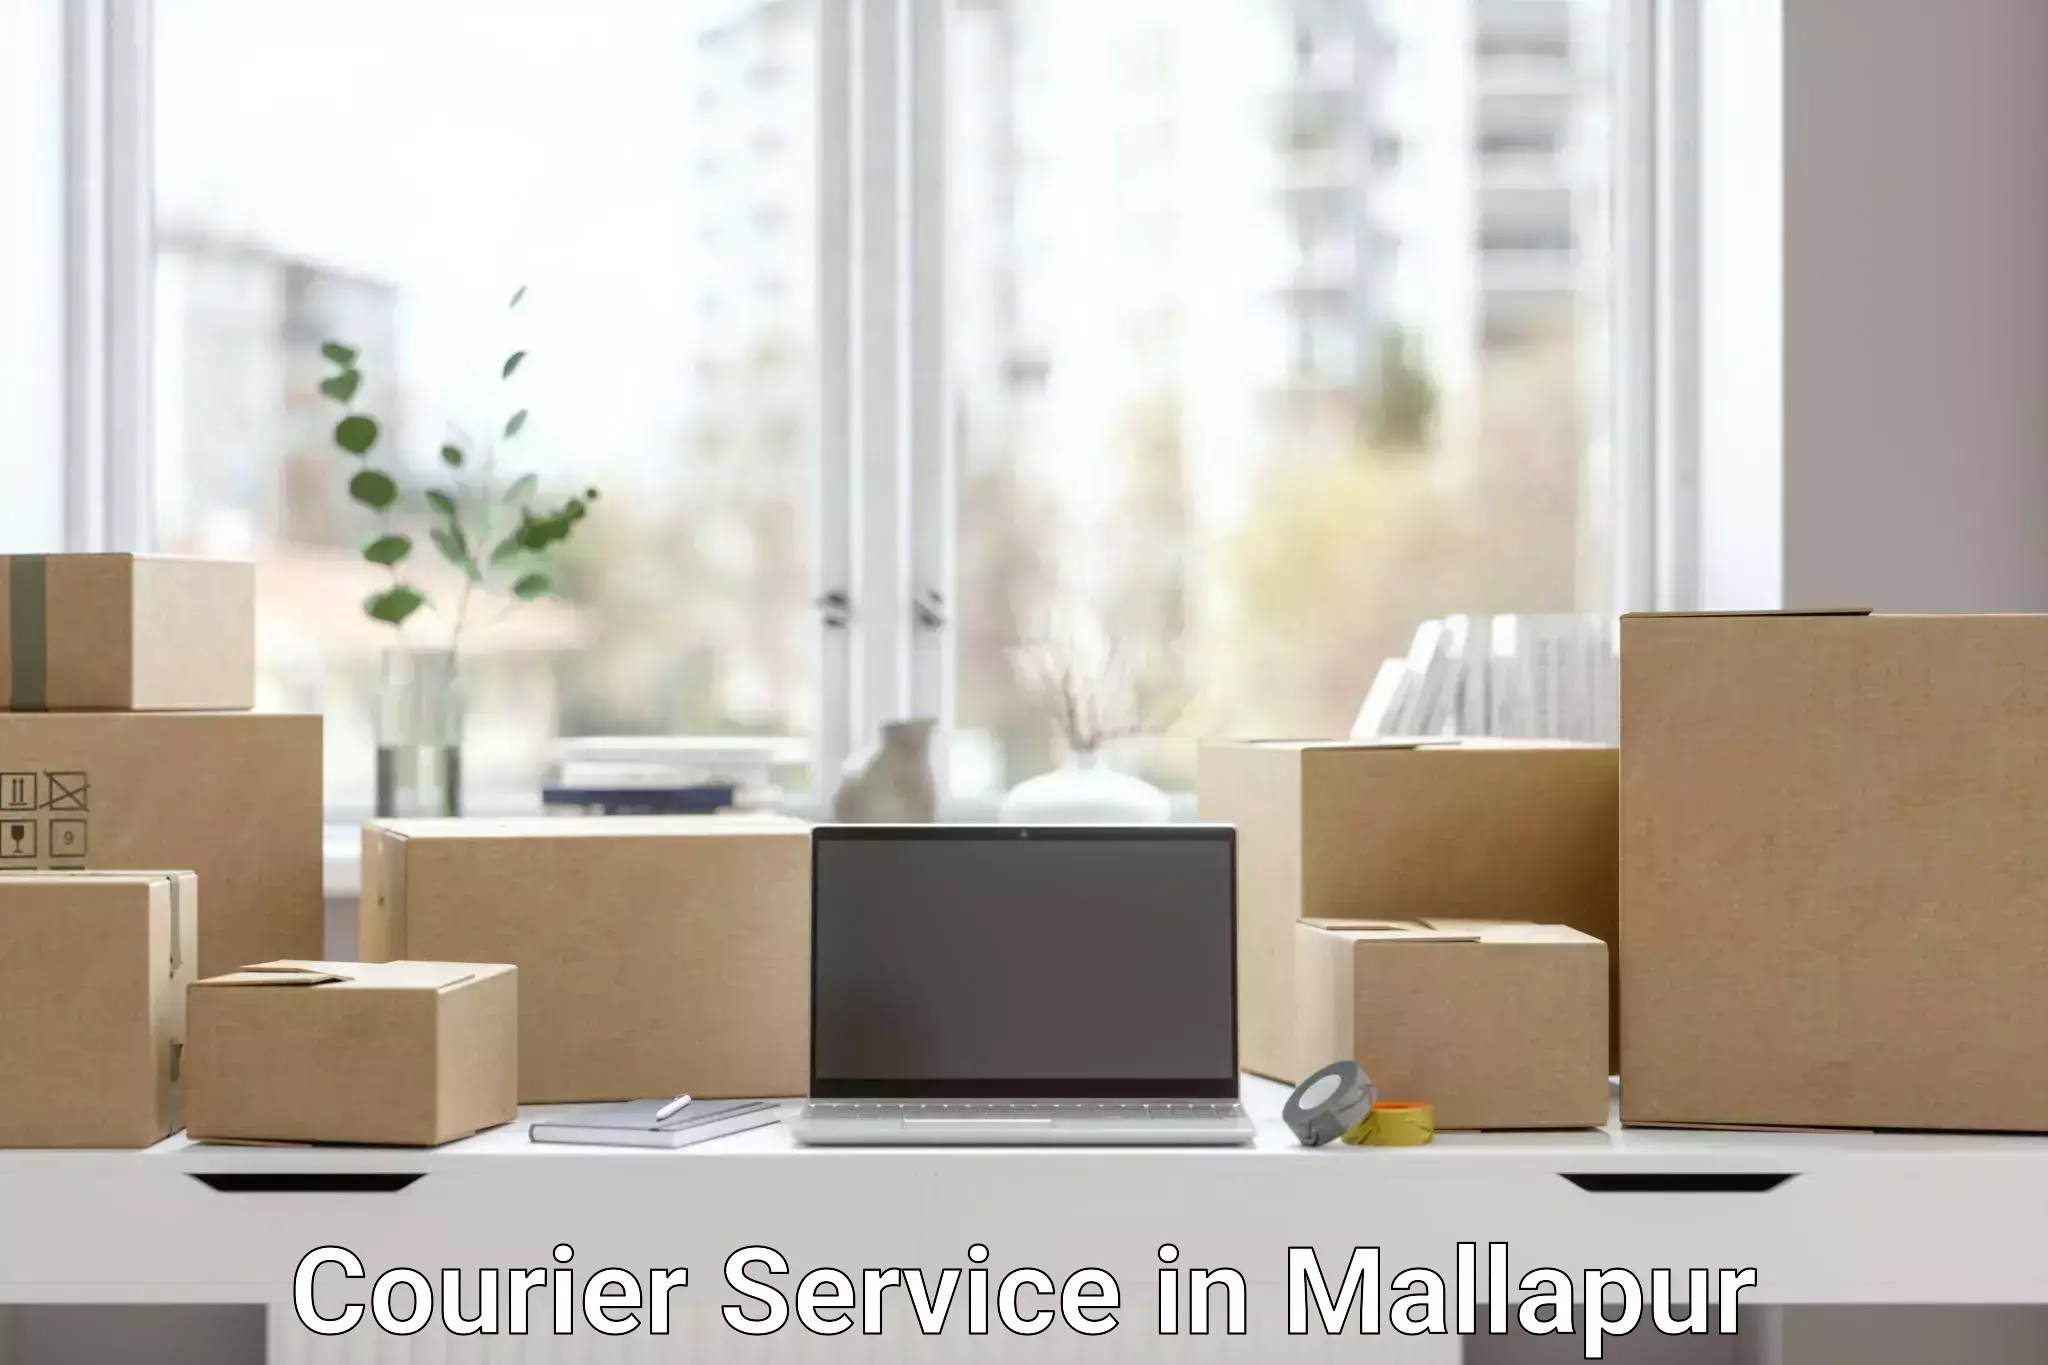 Rapid shipping services in Mallapur